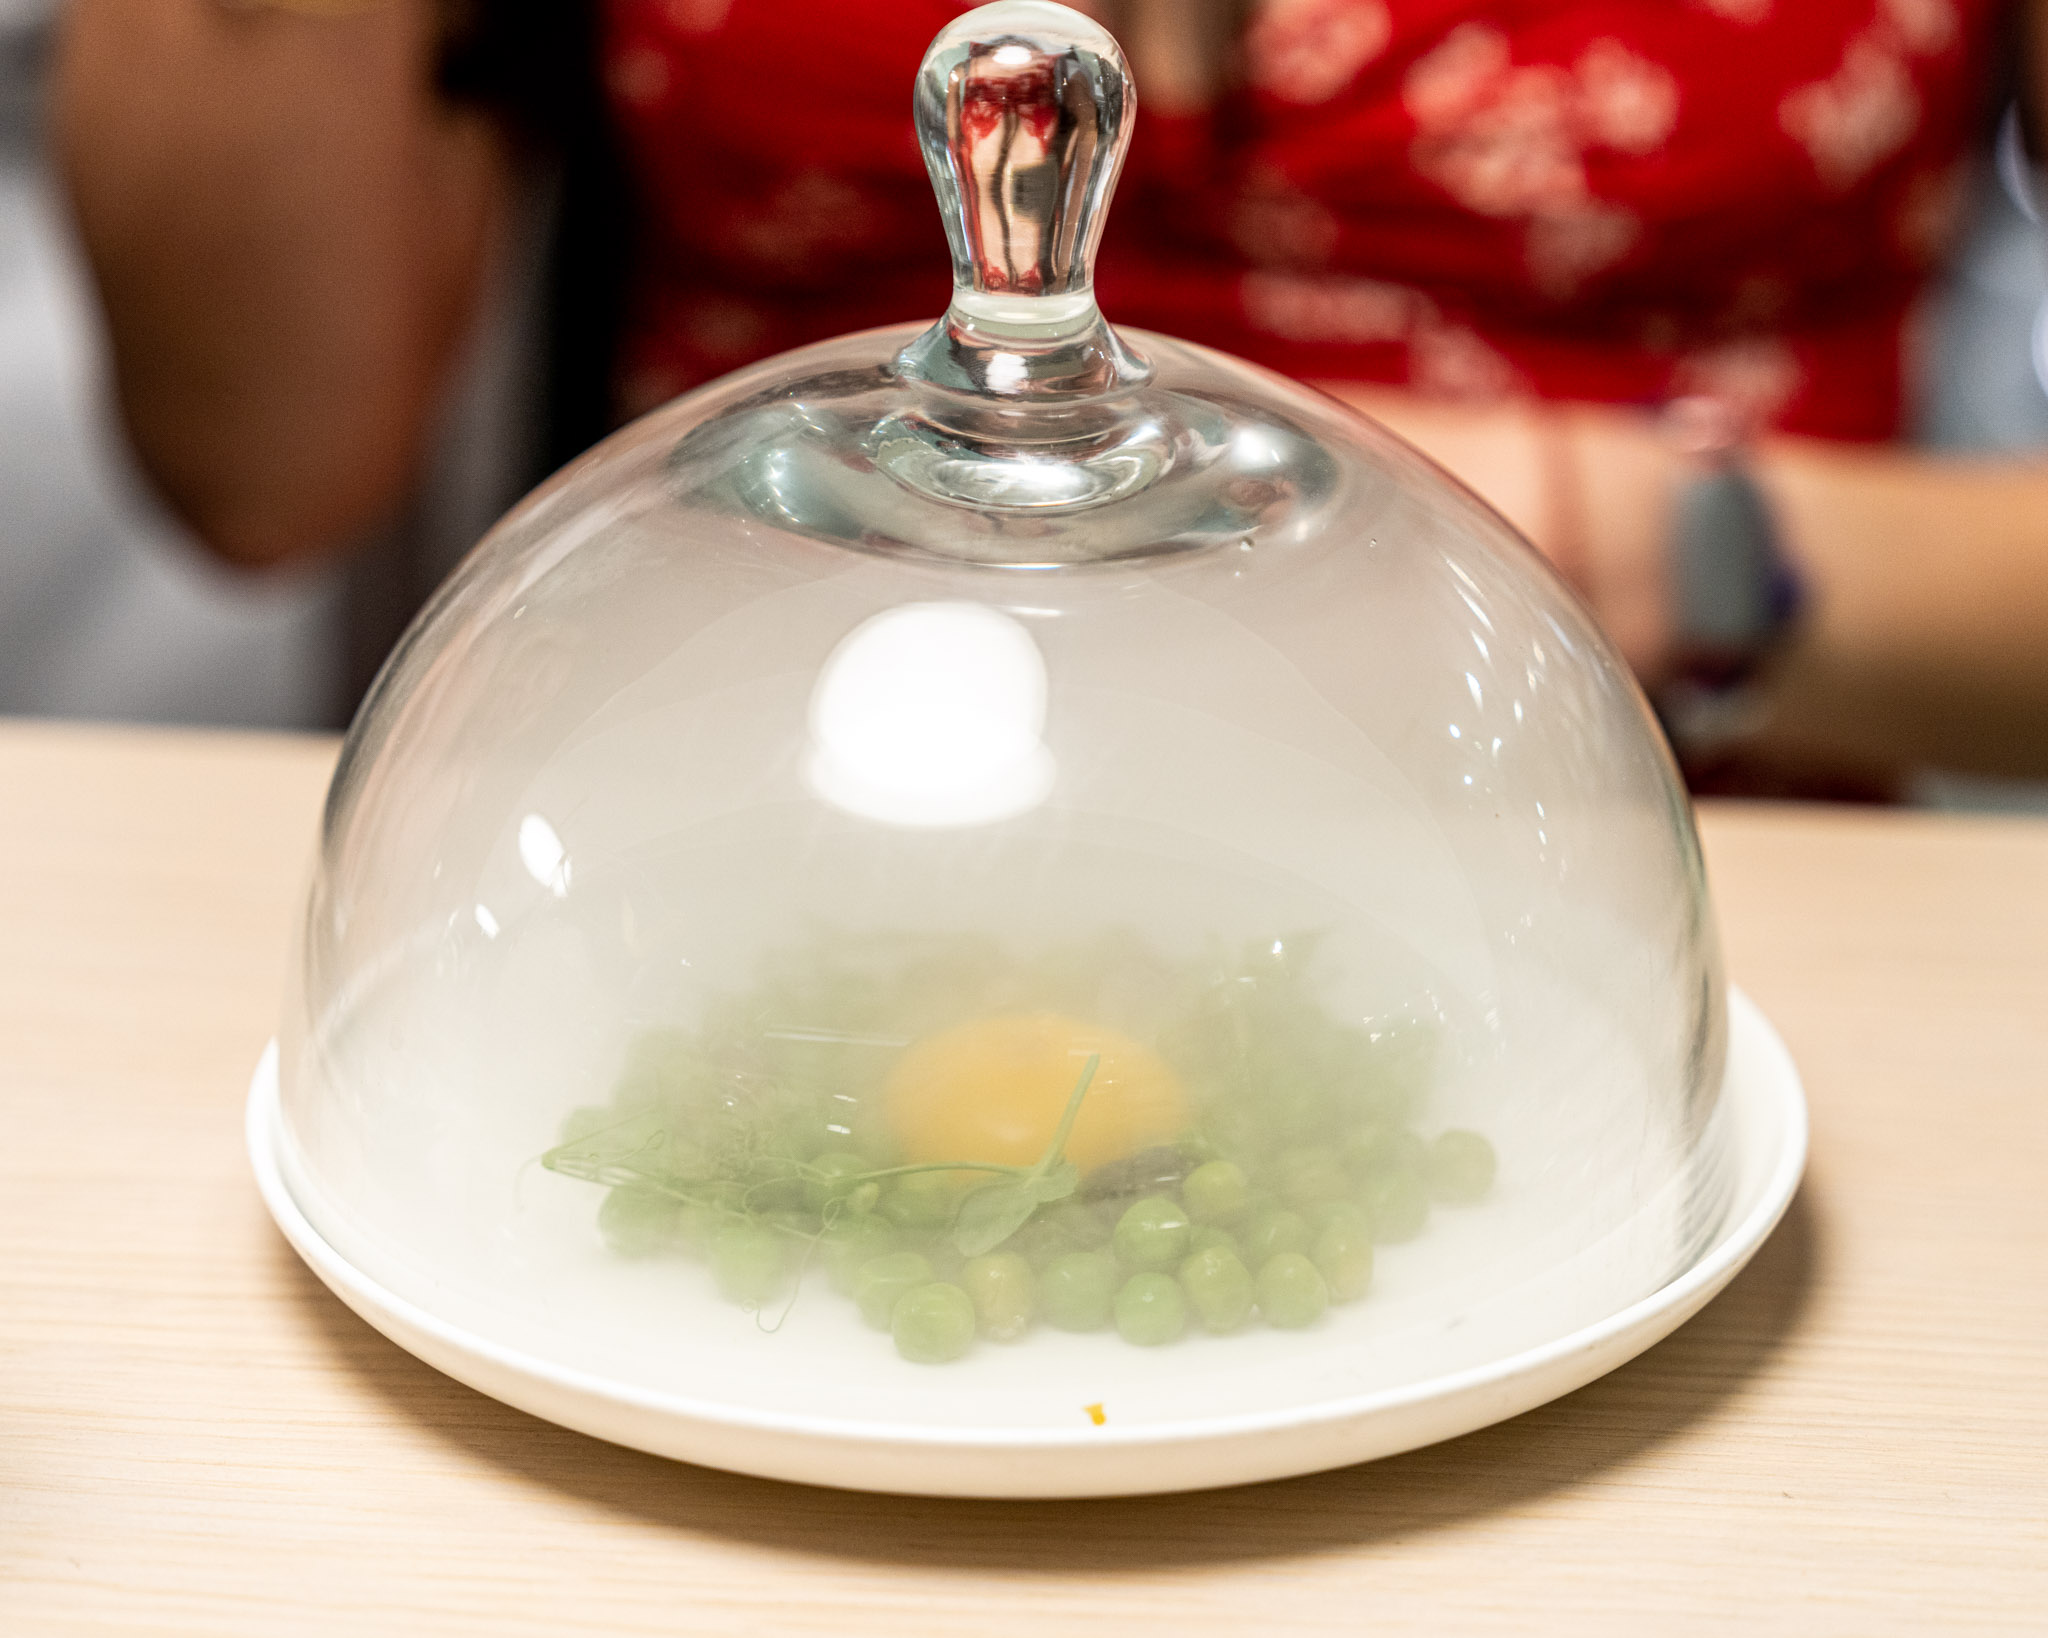 a plate with a glass cover and a egg in it